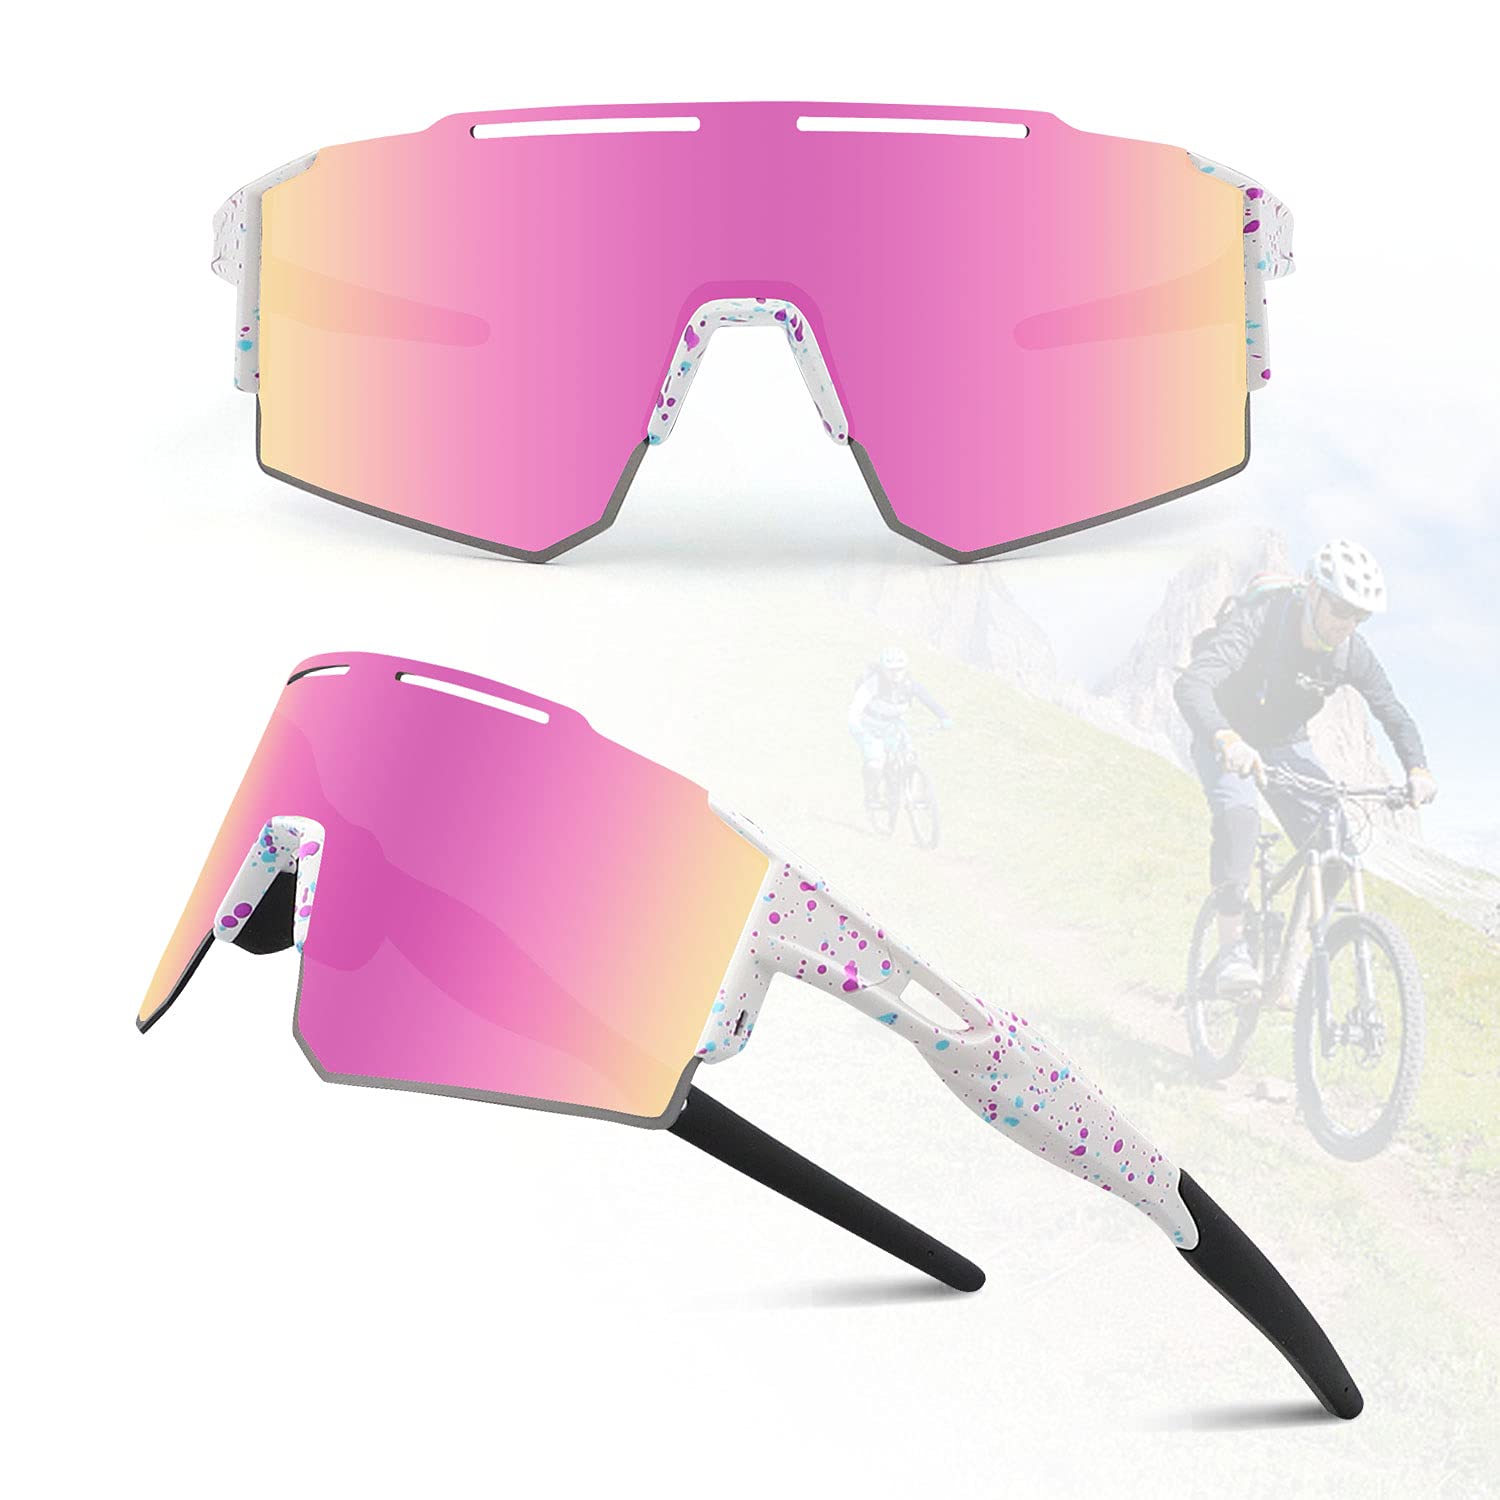 Ukoly Cycling Sunglasses for Men Women with 3 Interchangeable Lenses,  Polarized Sports Sunglasses, Baseball Sunglasses 1